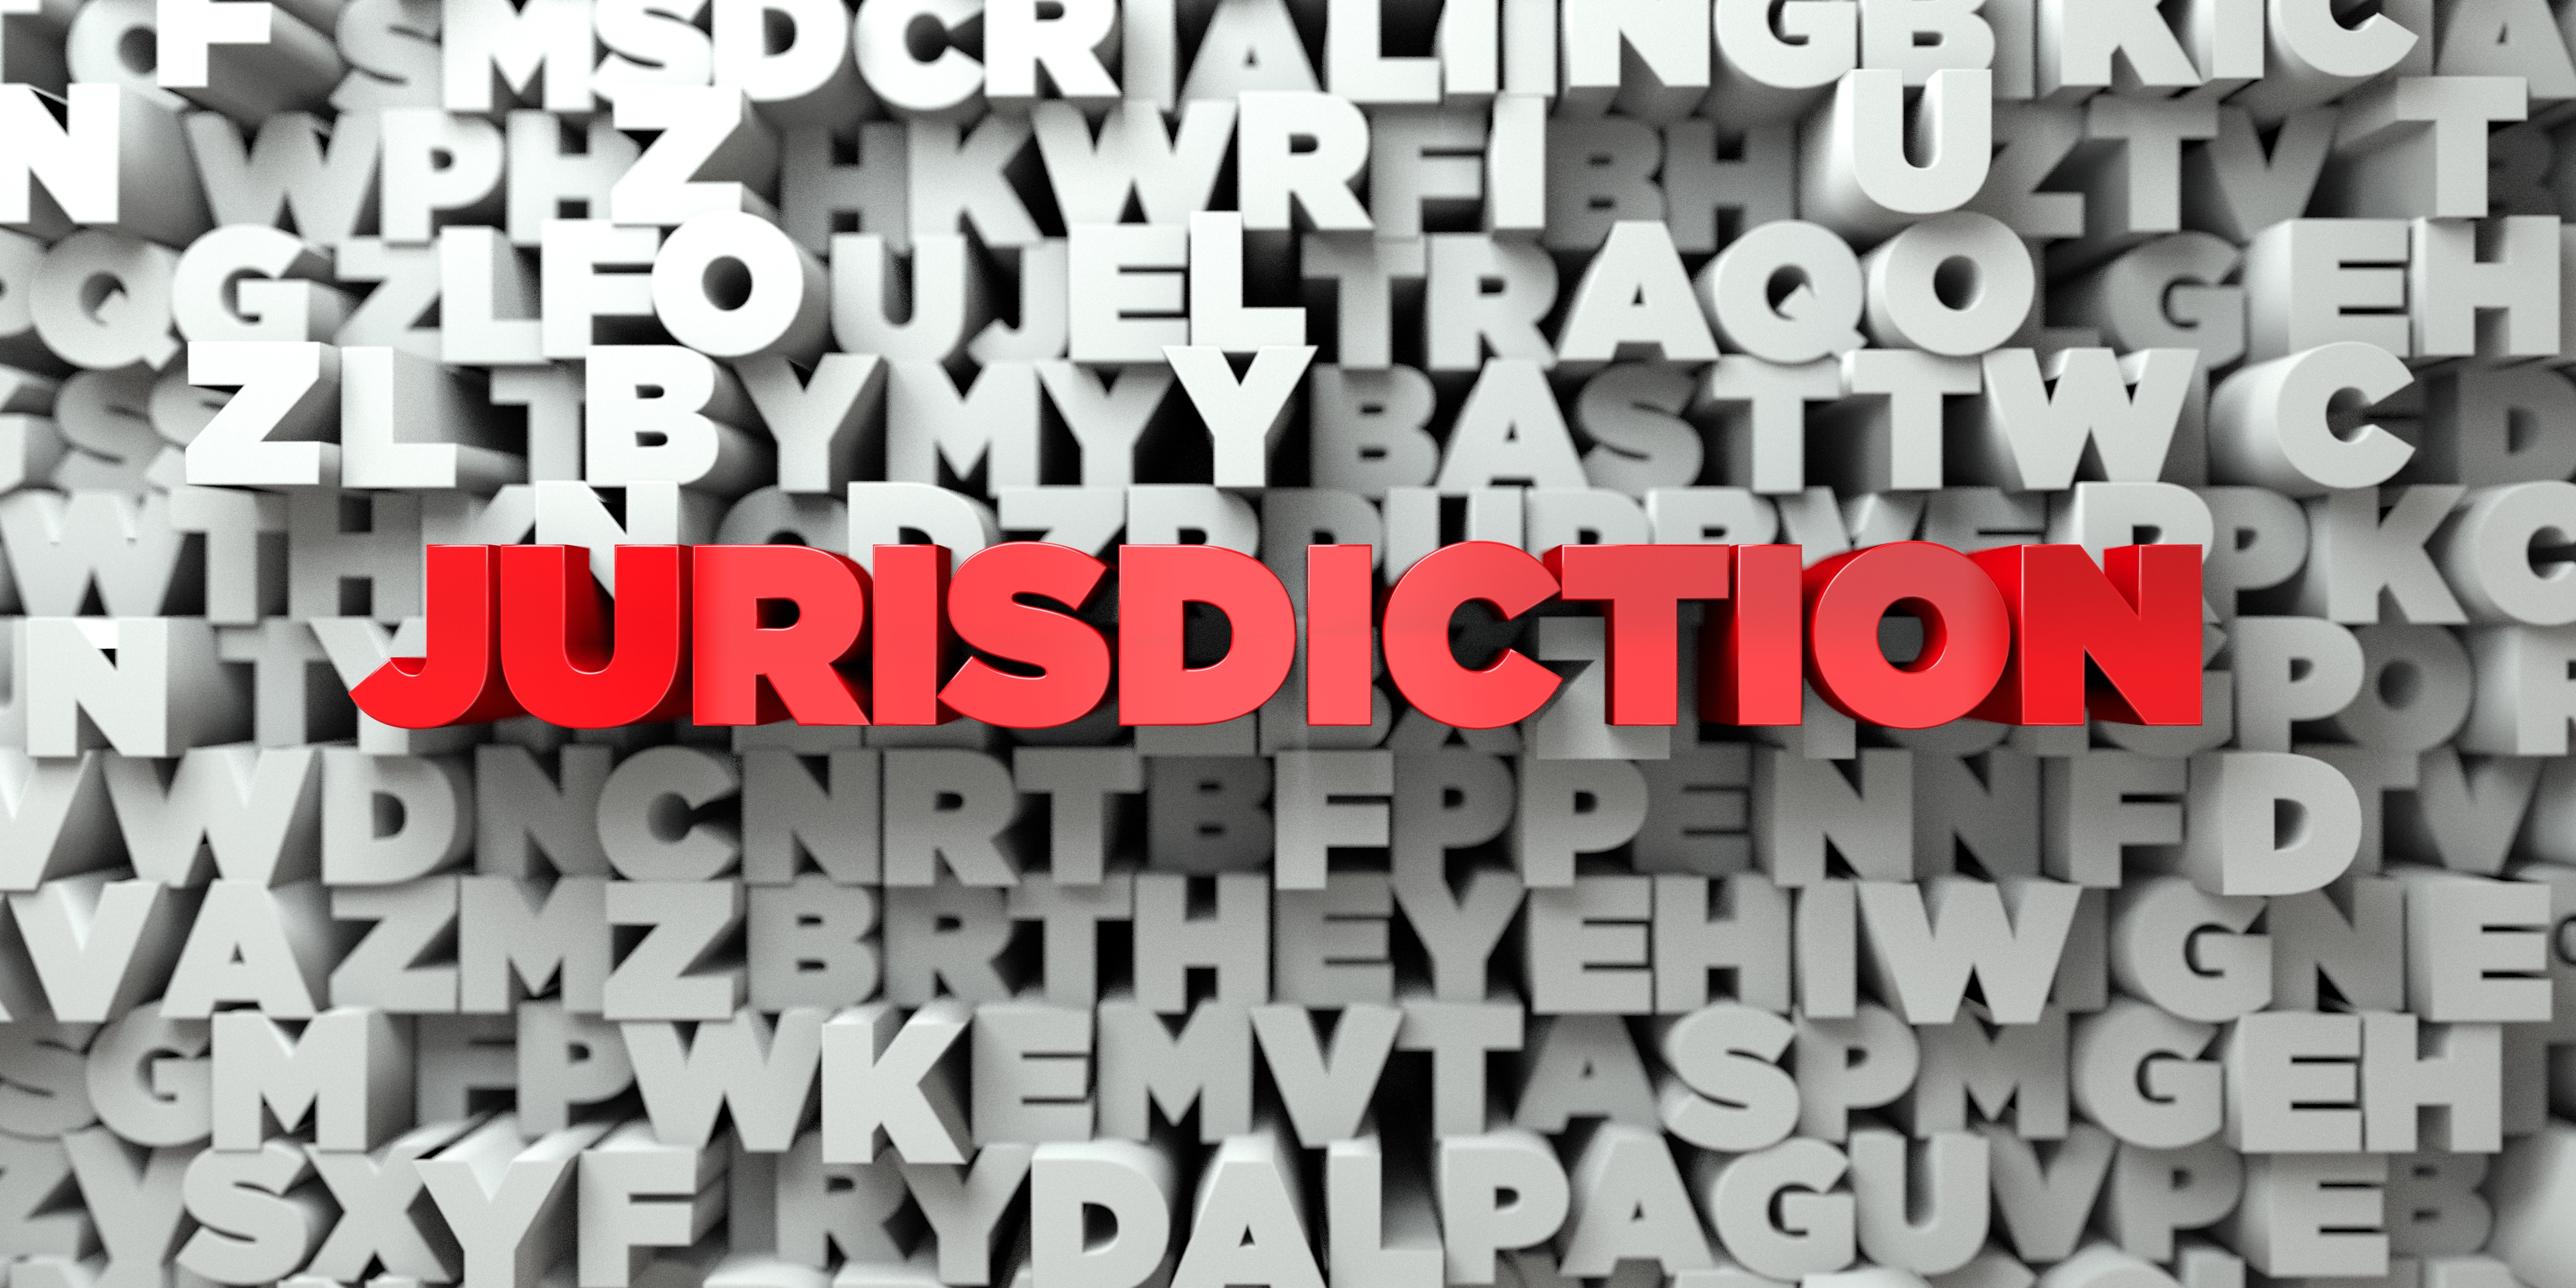 JURISDICTION -   3D stock image of Red text on white background